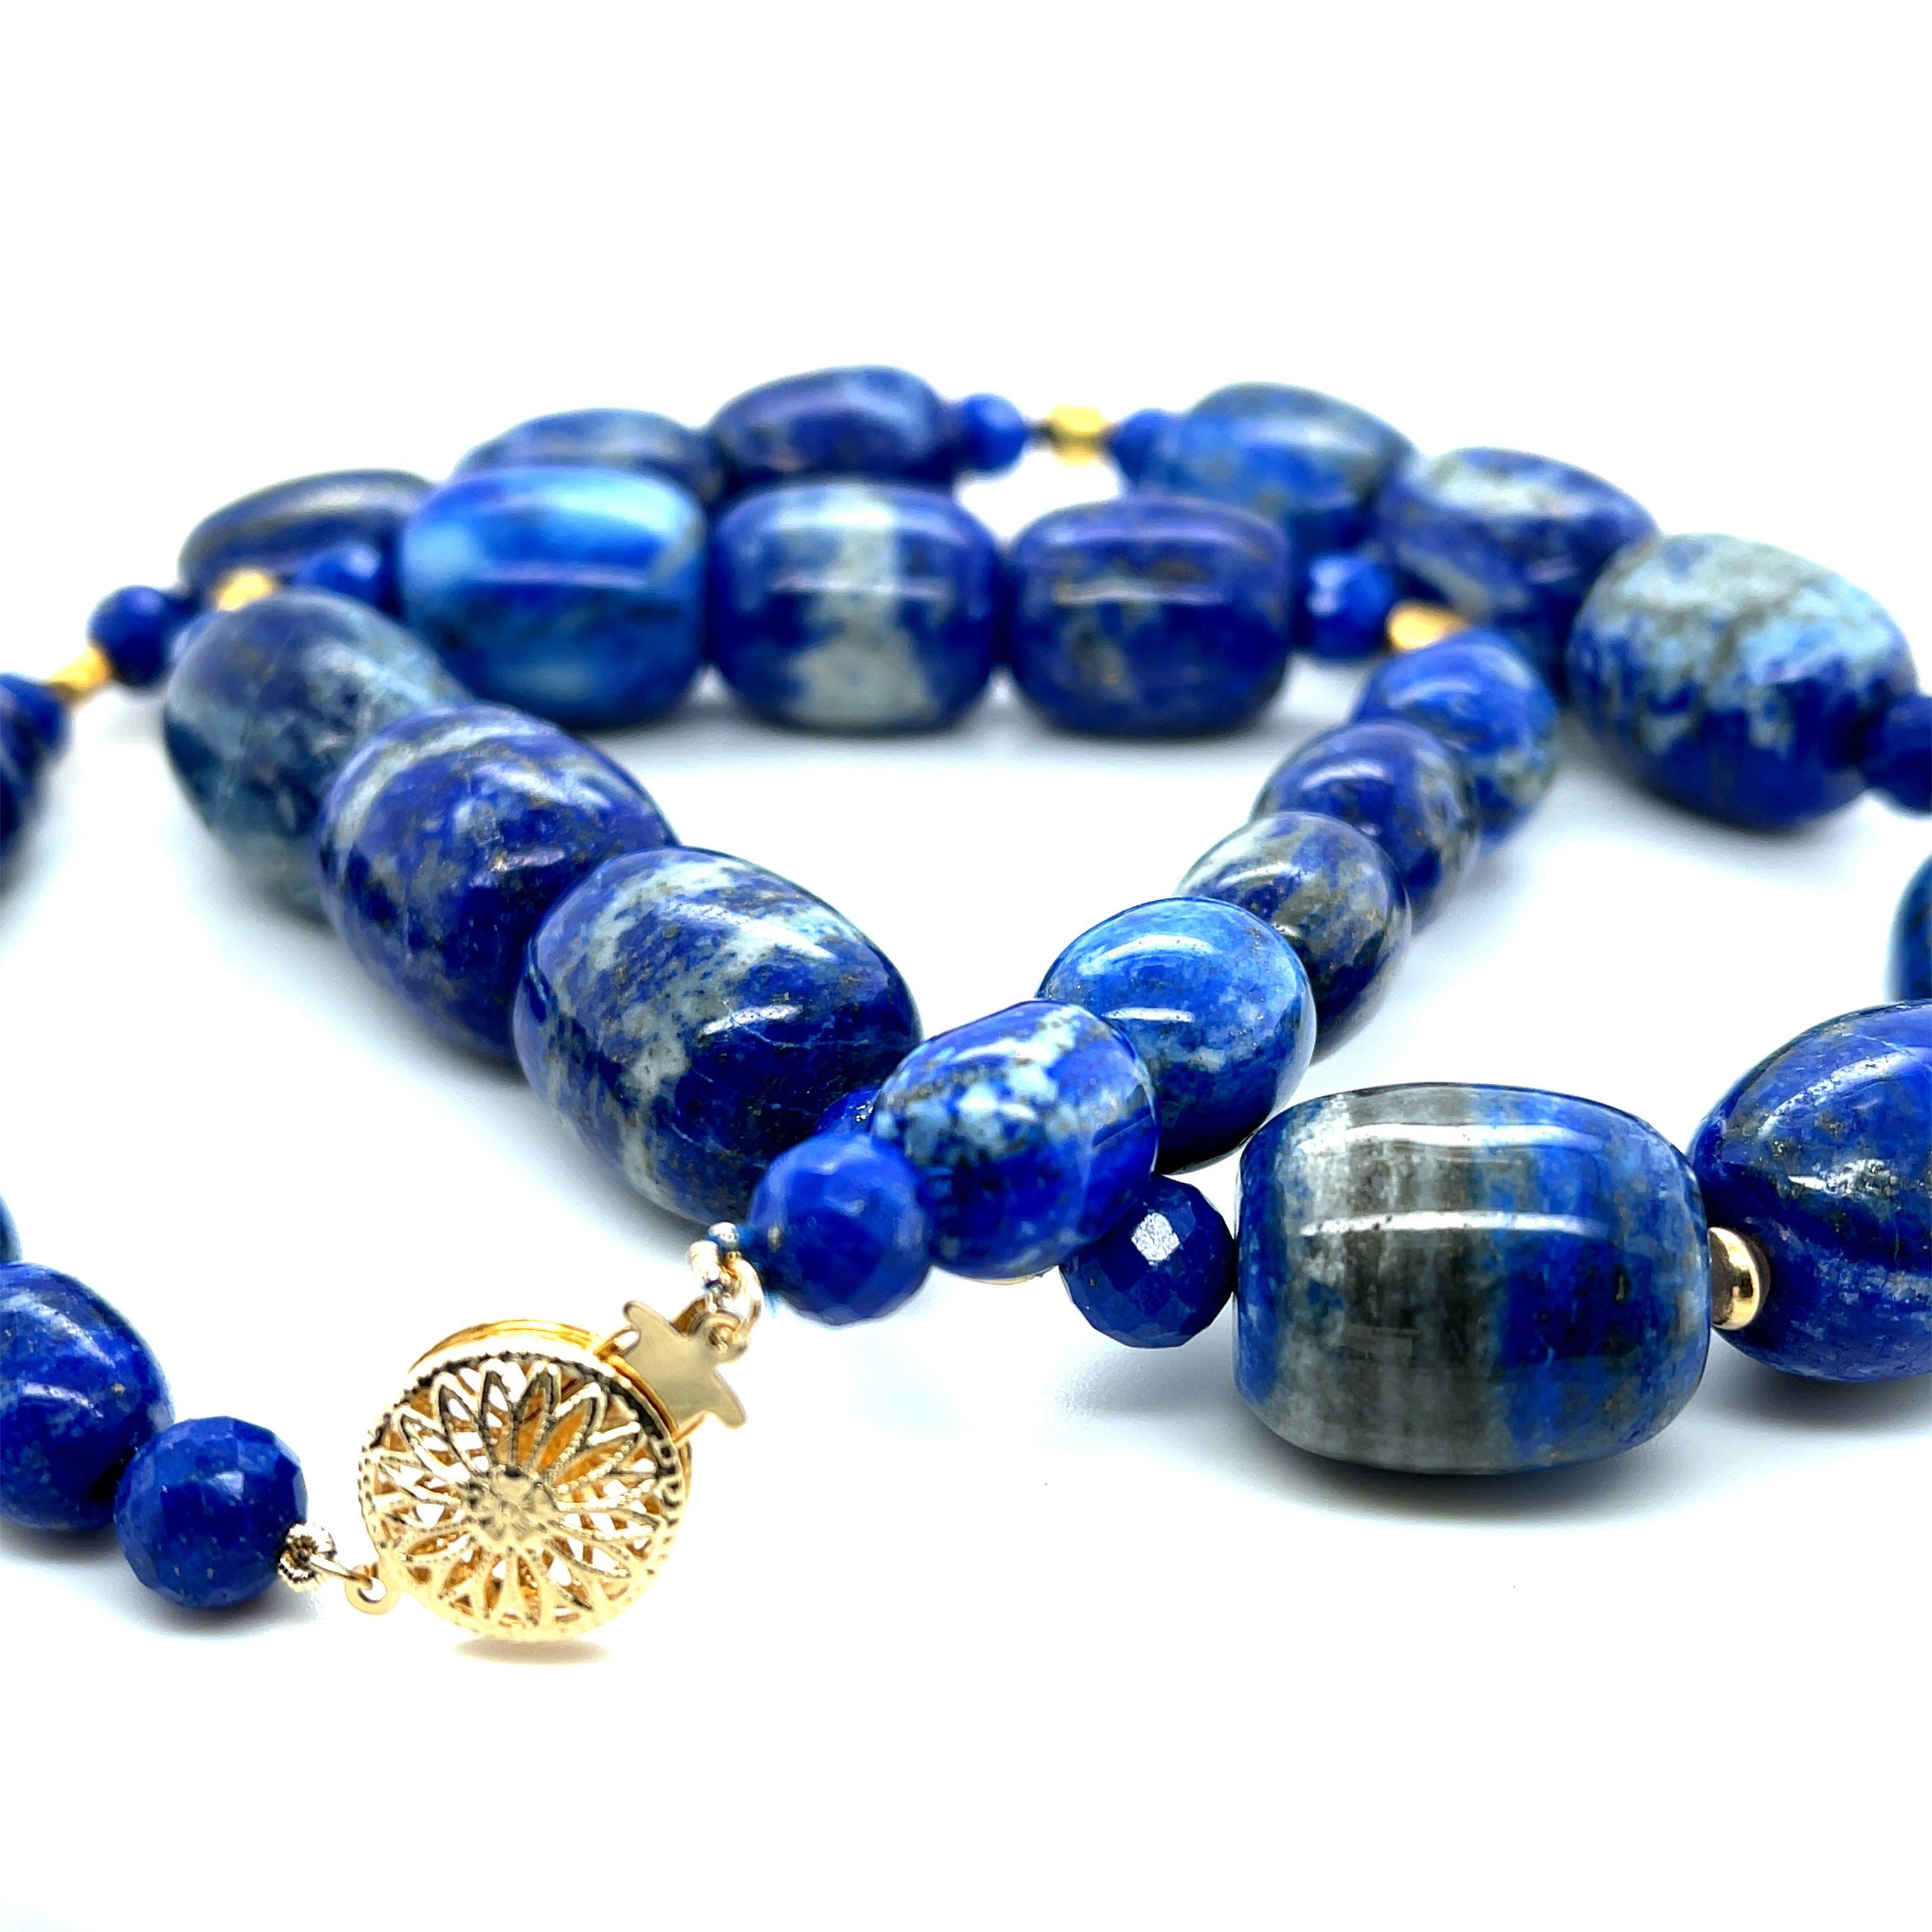 This beautiful necklace features unusual barrel-shaped lapis lazuli beads in graduating sizes, all with gorgeous Royal blue color and characteristic pyrite and calcite veining. The barrel-shaped beads have been arranged and strung on silk thread